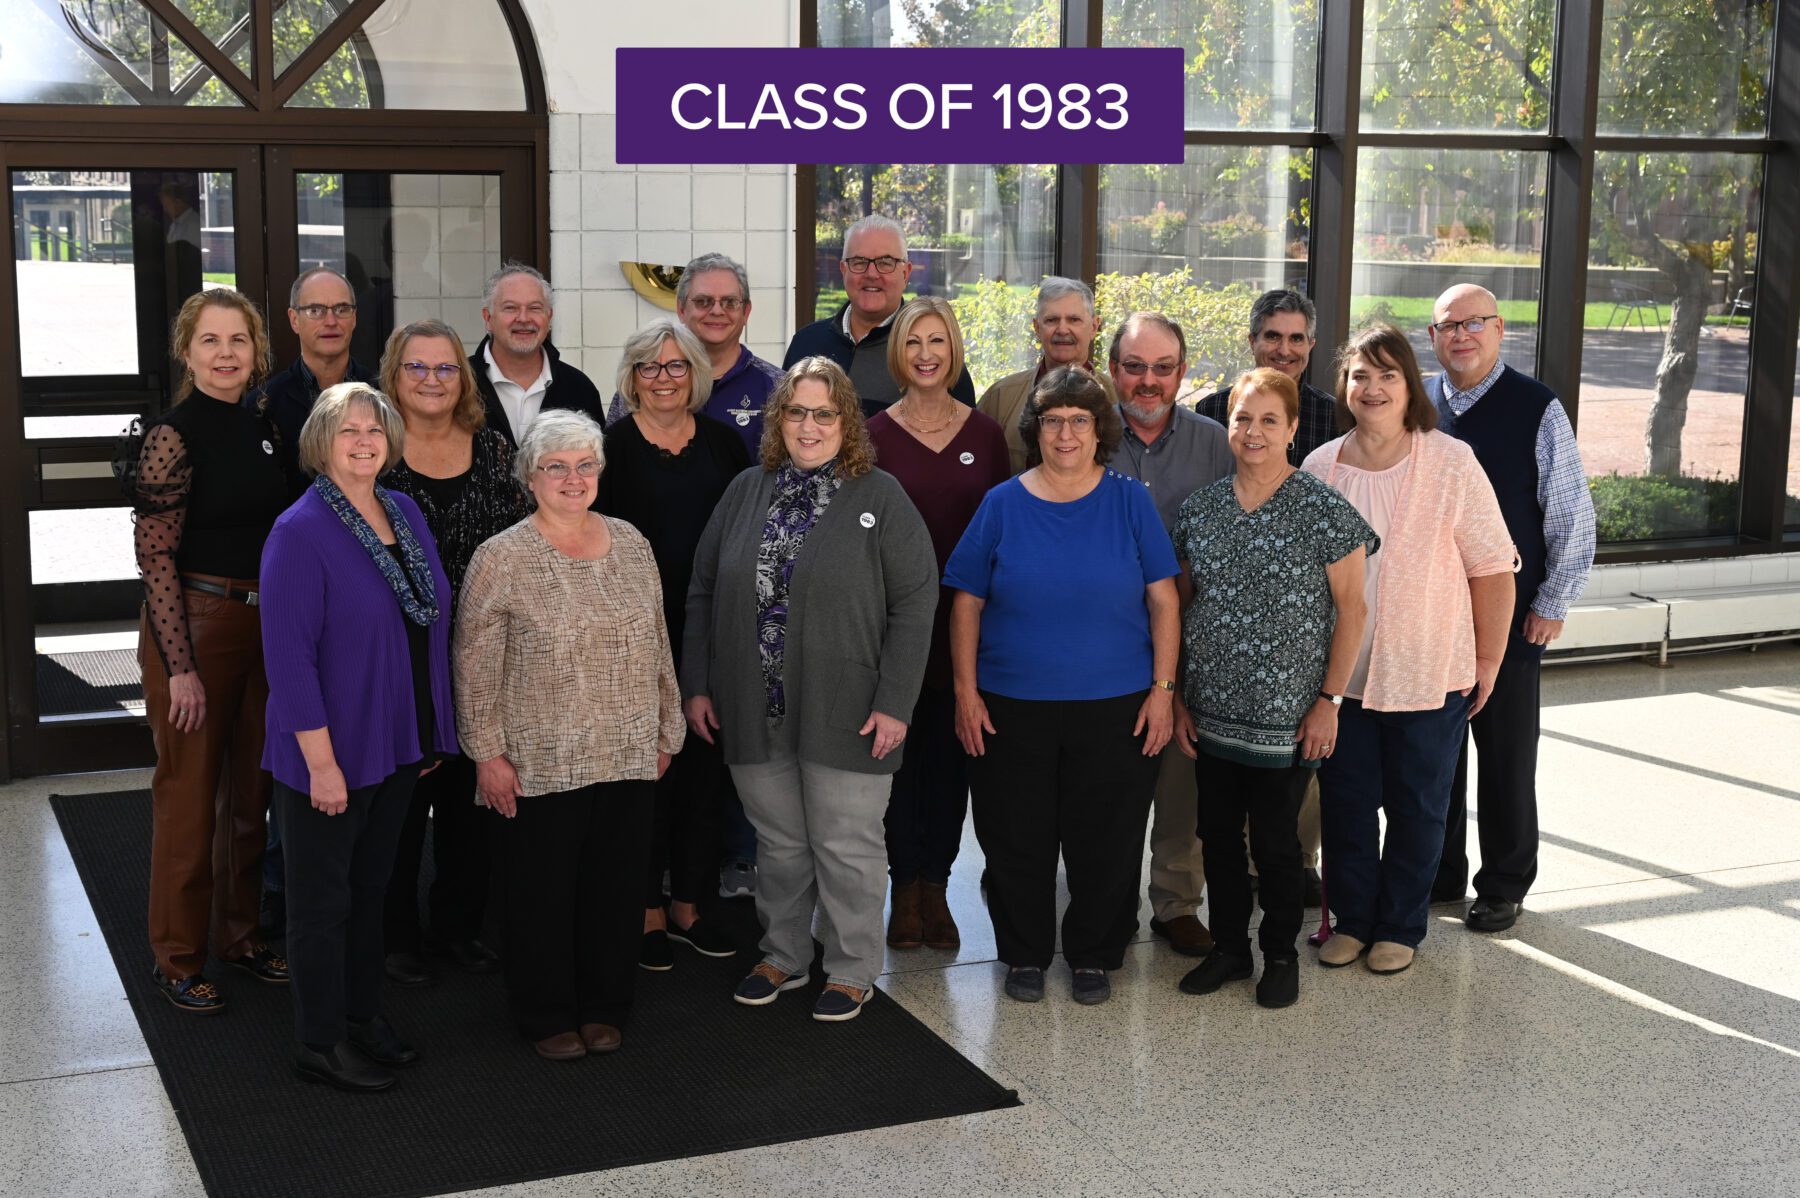 Those who came for the class reunion of 1983 pose for a group photo